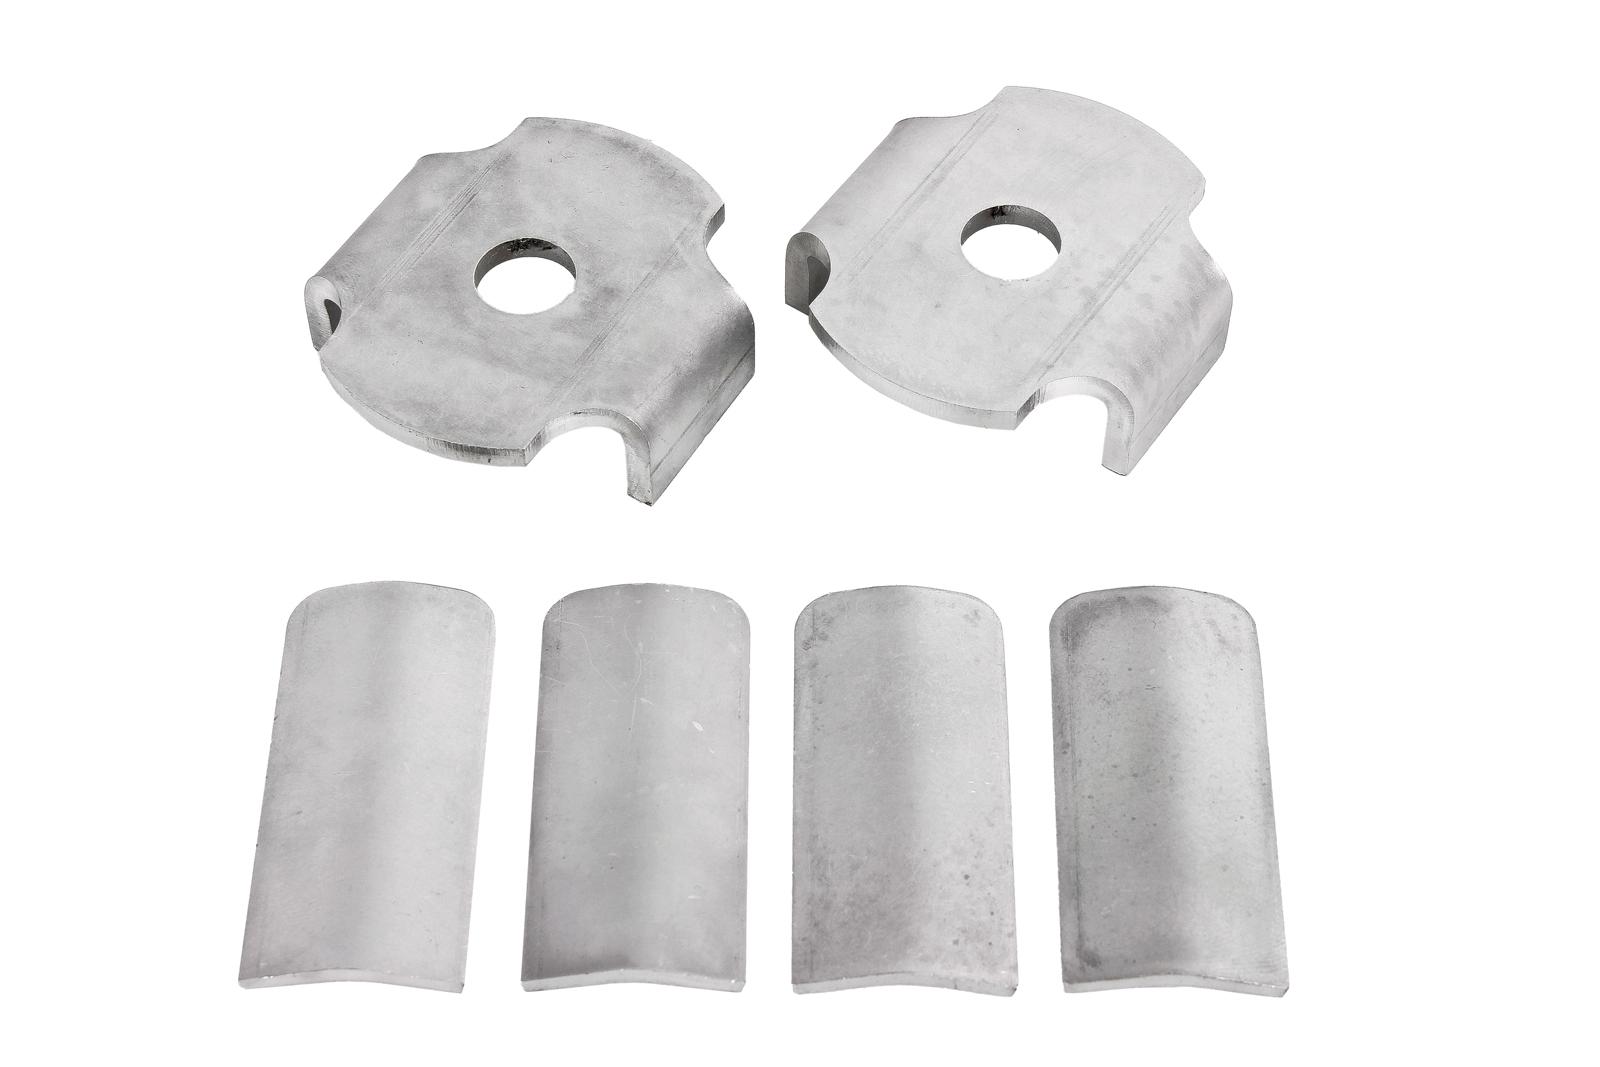 2015+ Ford Mustang BMR Suspension Rear Cradle Bushing Kit - Steel Inserts Only